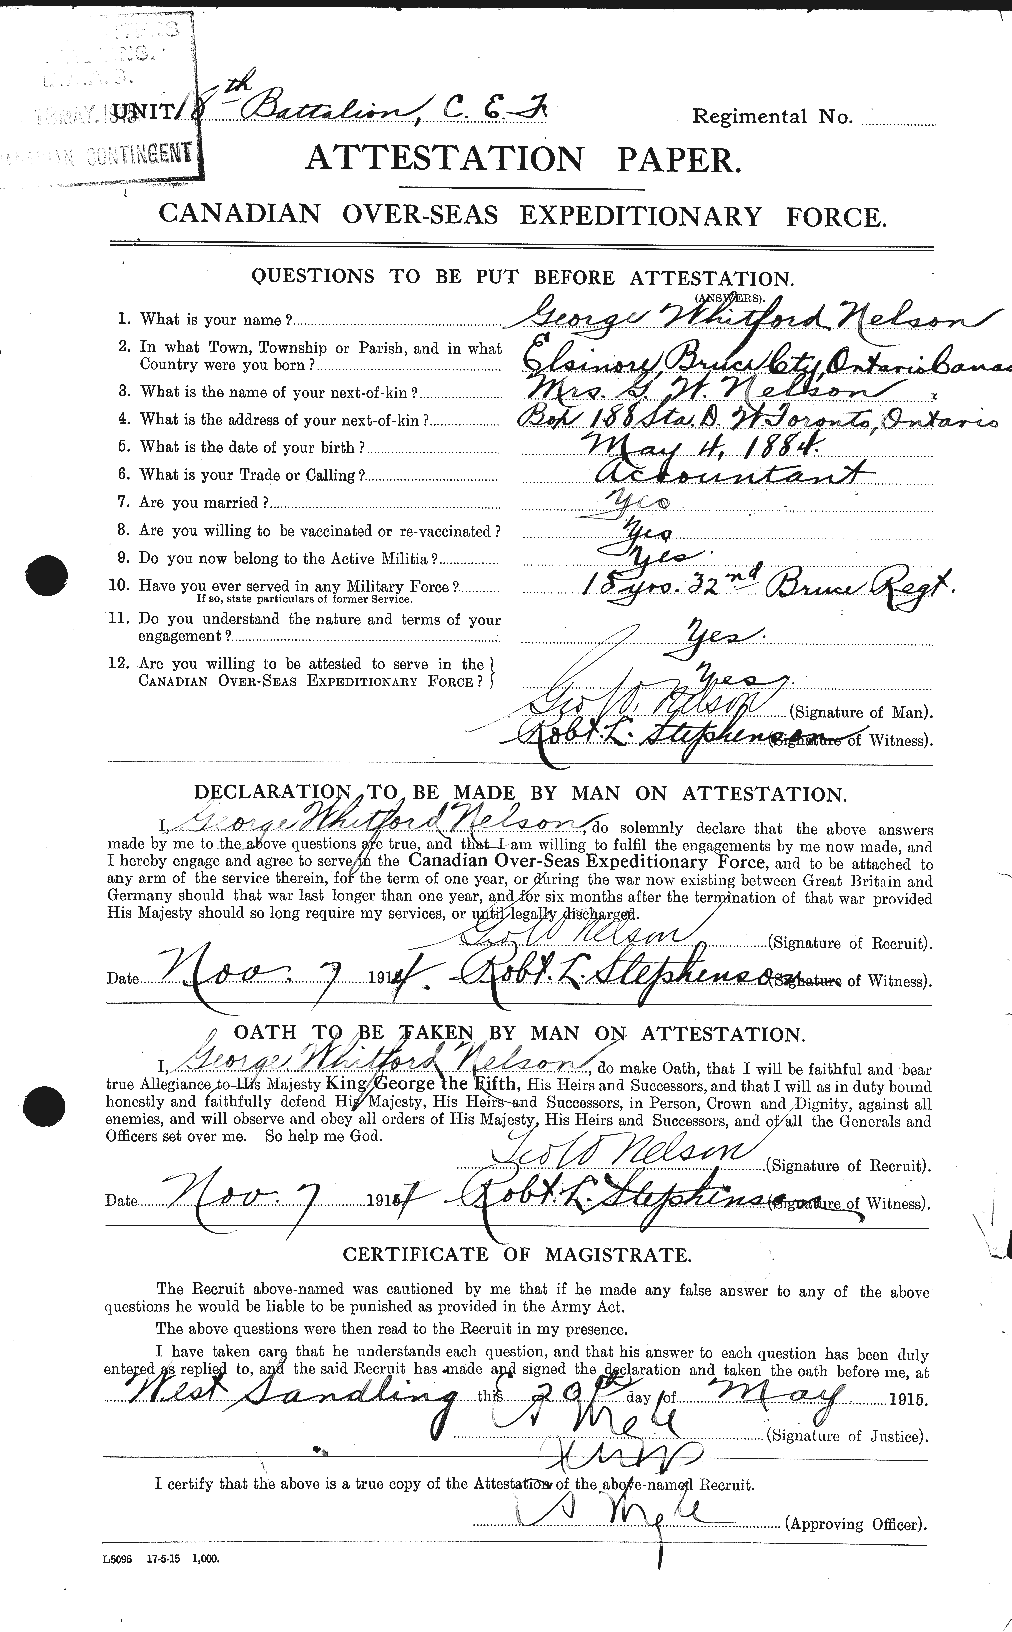 Personnel Records of the First World War - CEF 543810a